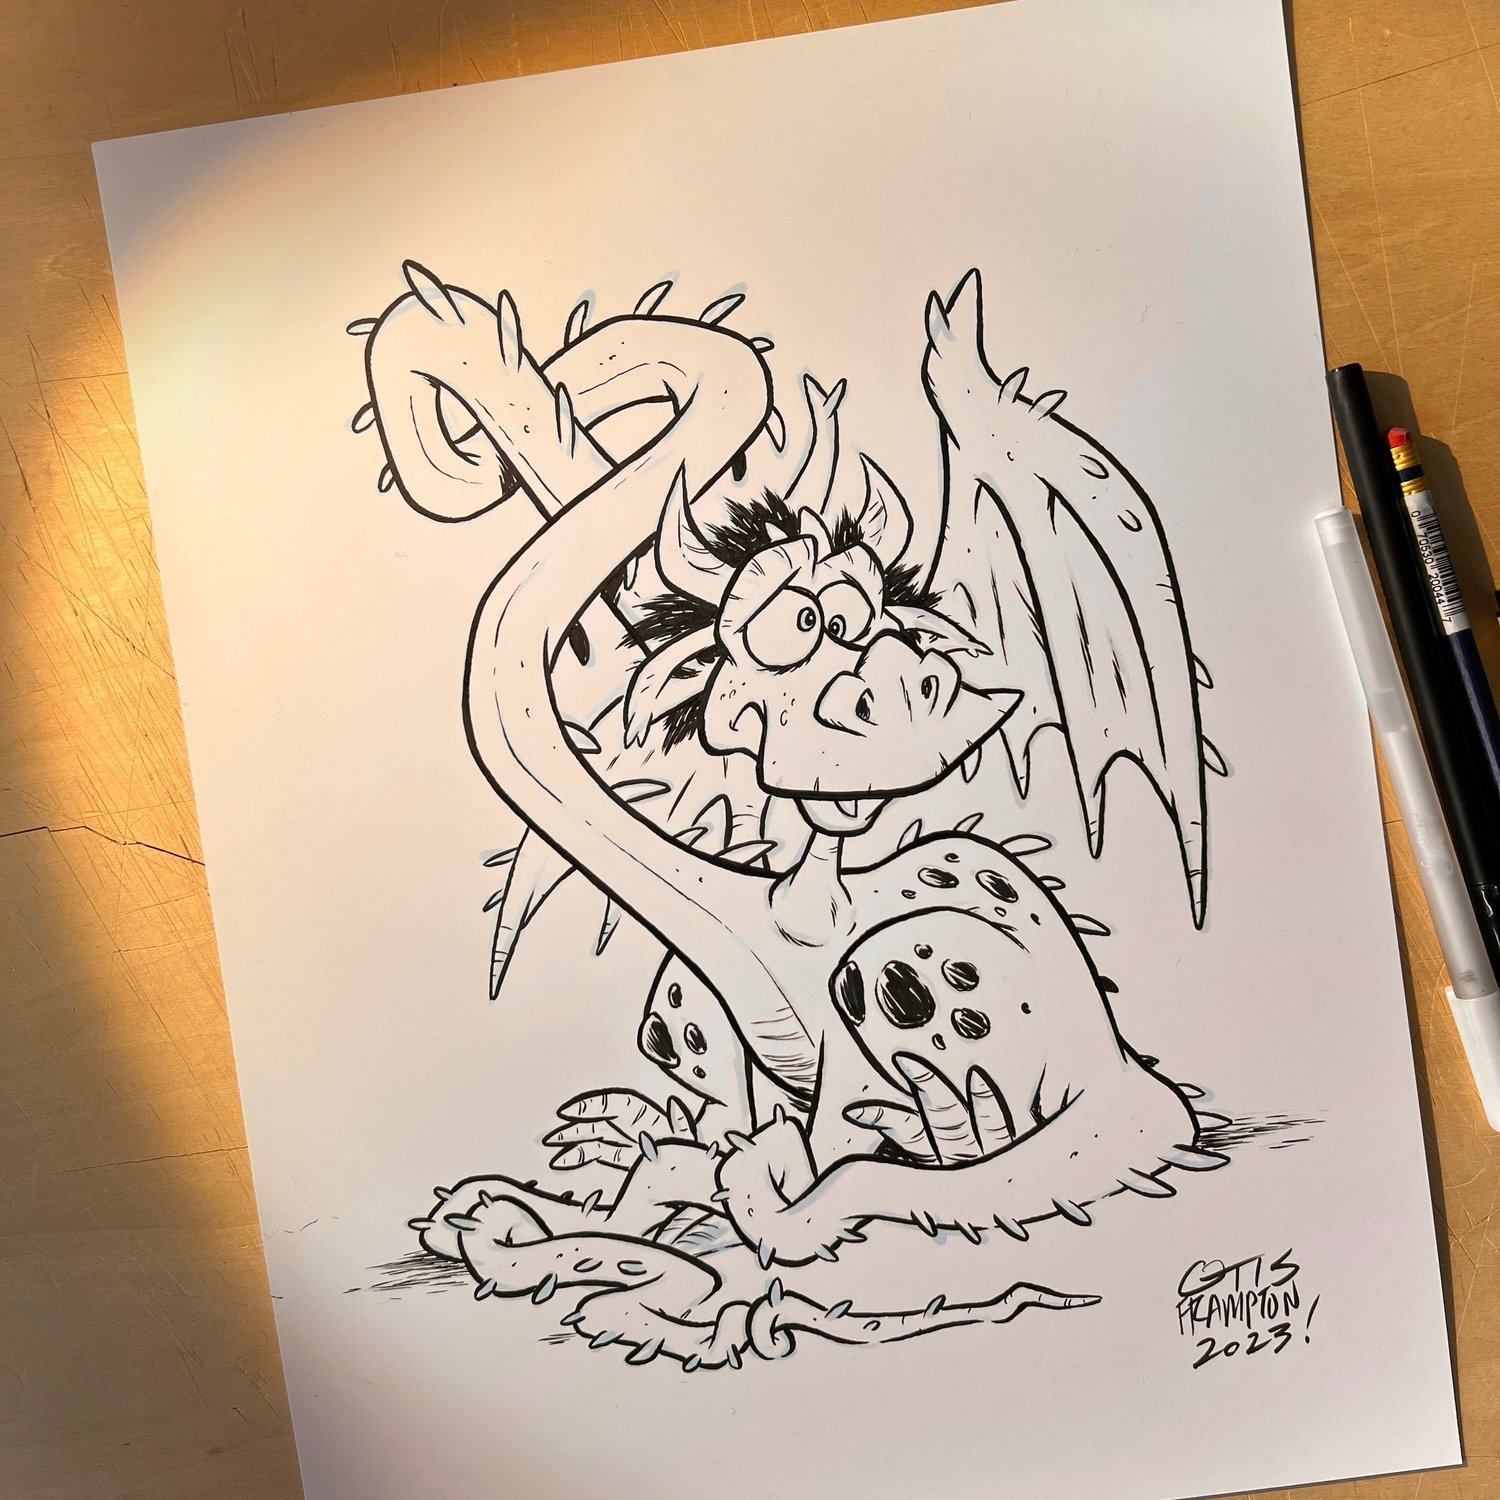 THE DRAGONS OF WESTMARCH: “Twisted” Original Art by Otis Frampton